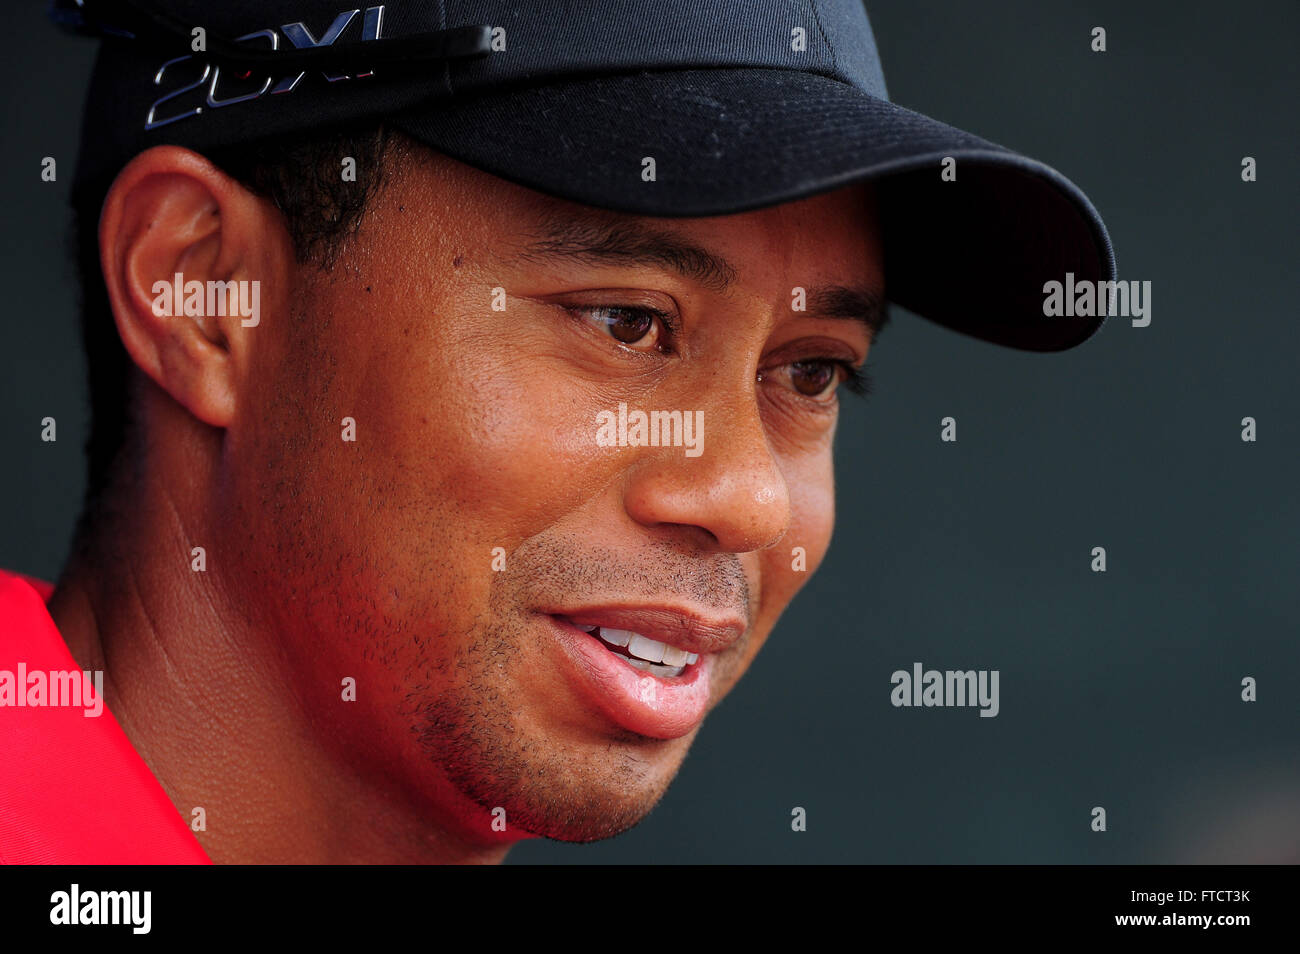 Ponte Vedra, Florida, USA. 13th May, 2012. Tiger Woods during the final round of the Players Championship at the TPC Sawgrass on May 13, 2012 in Ponte Vedra, Fla. ZUMA PRESS/ Scott A. Miller. © Scott A. Miller/ZUMA Wire/Alamy Live News Stock Photo